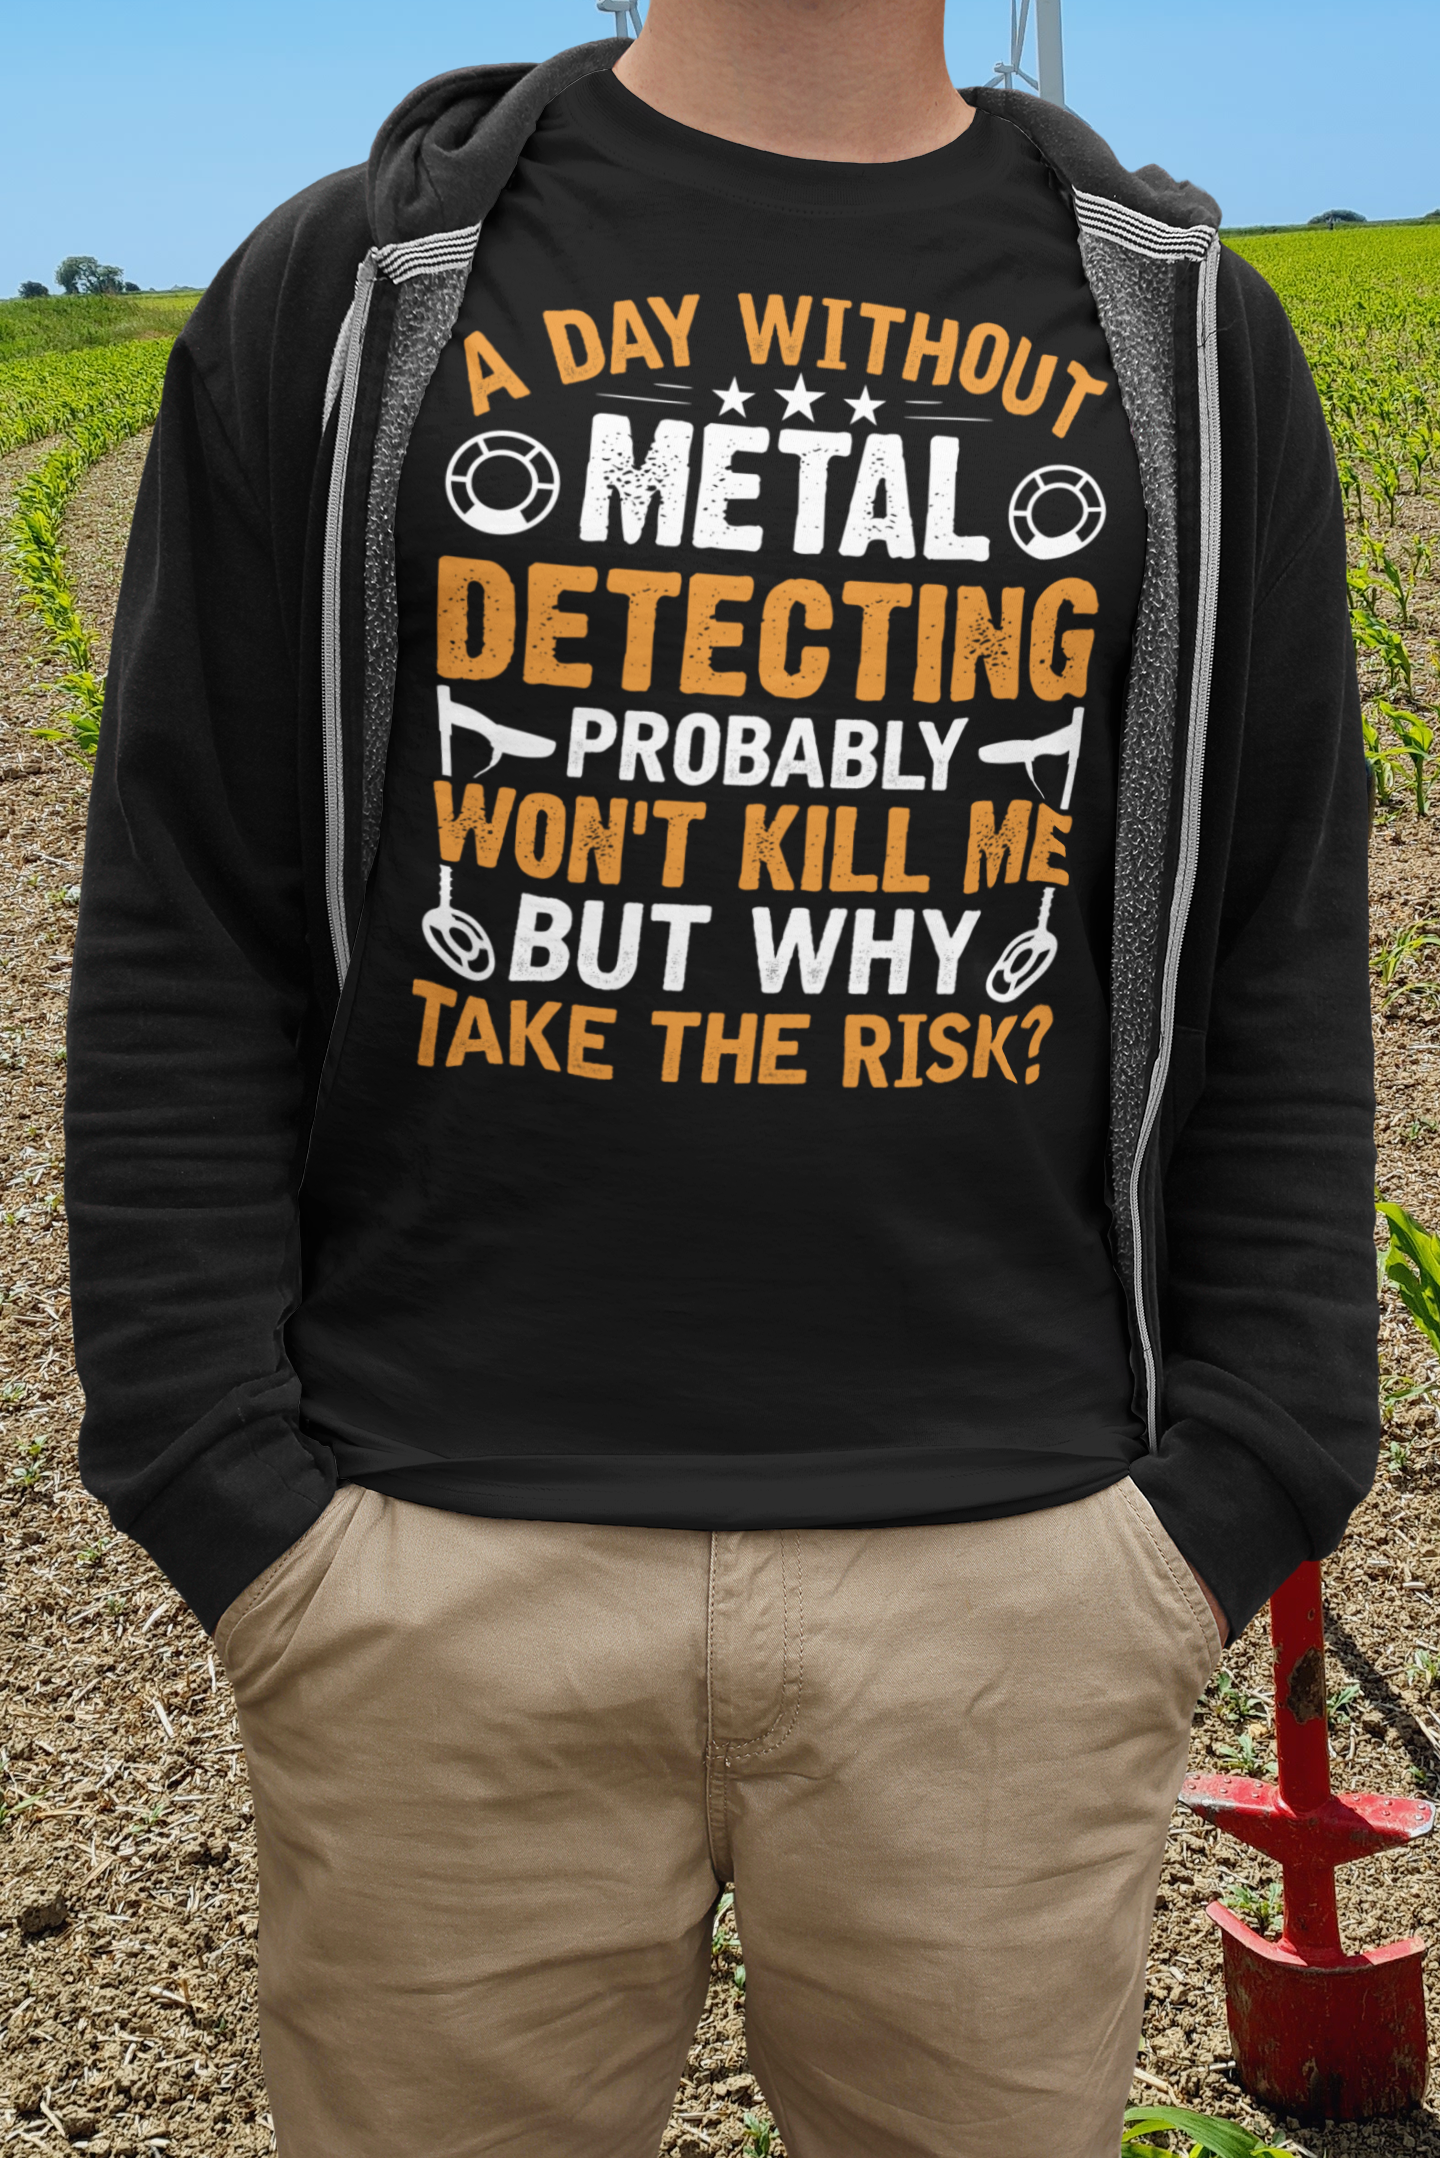 A day without metal detecting probably won't kill me but why take the risk